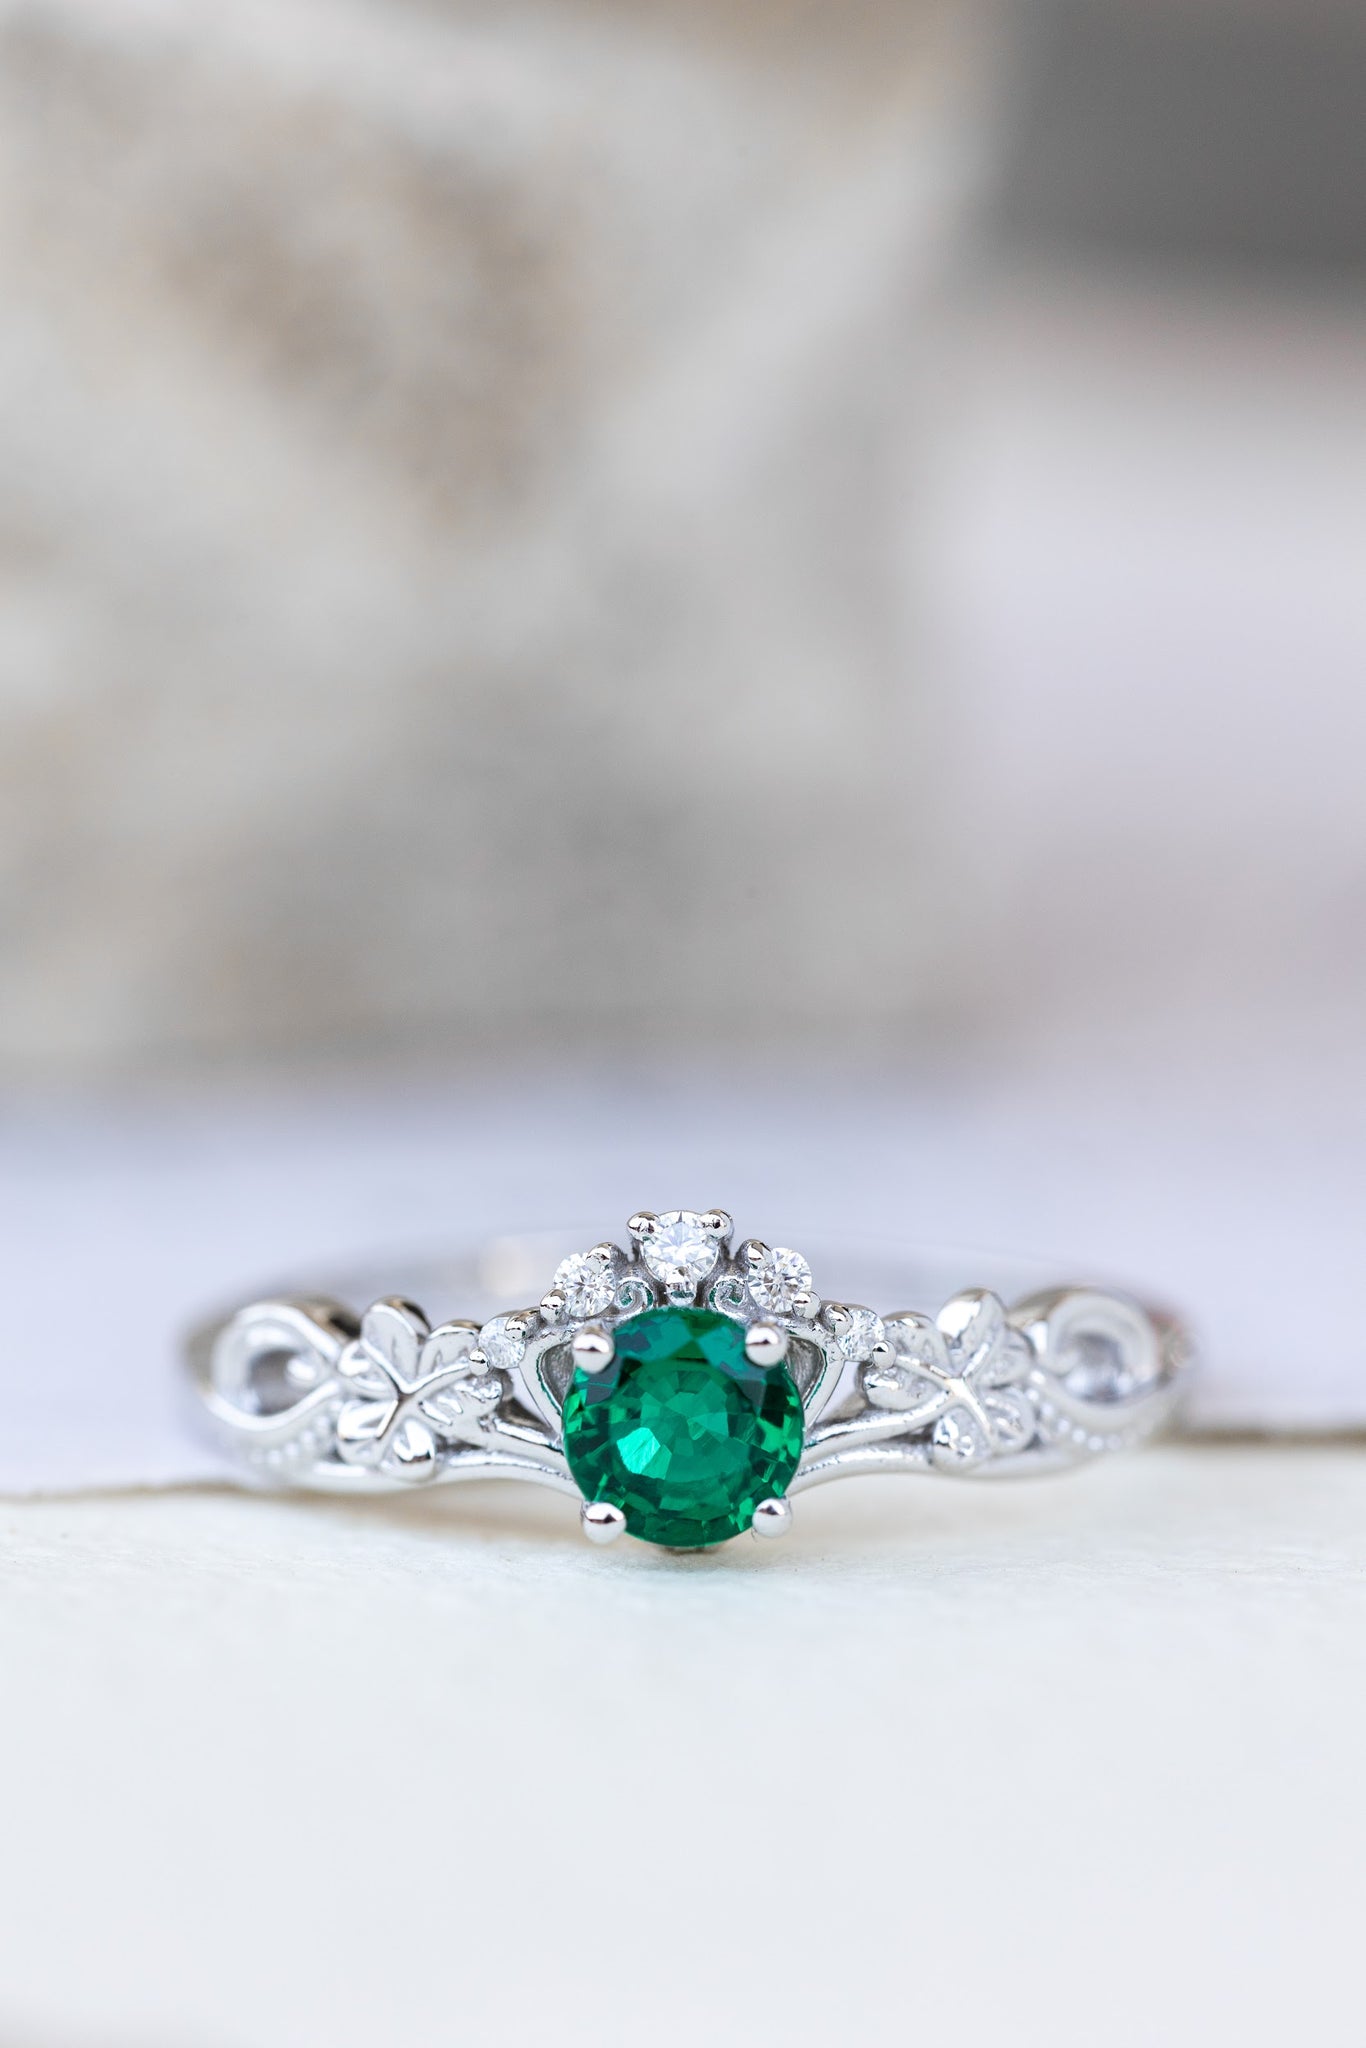 Lab created emerald engagement ring, celtic proposal ring with diamonds / Horta - Eden Garden Jewelry™